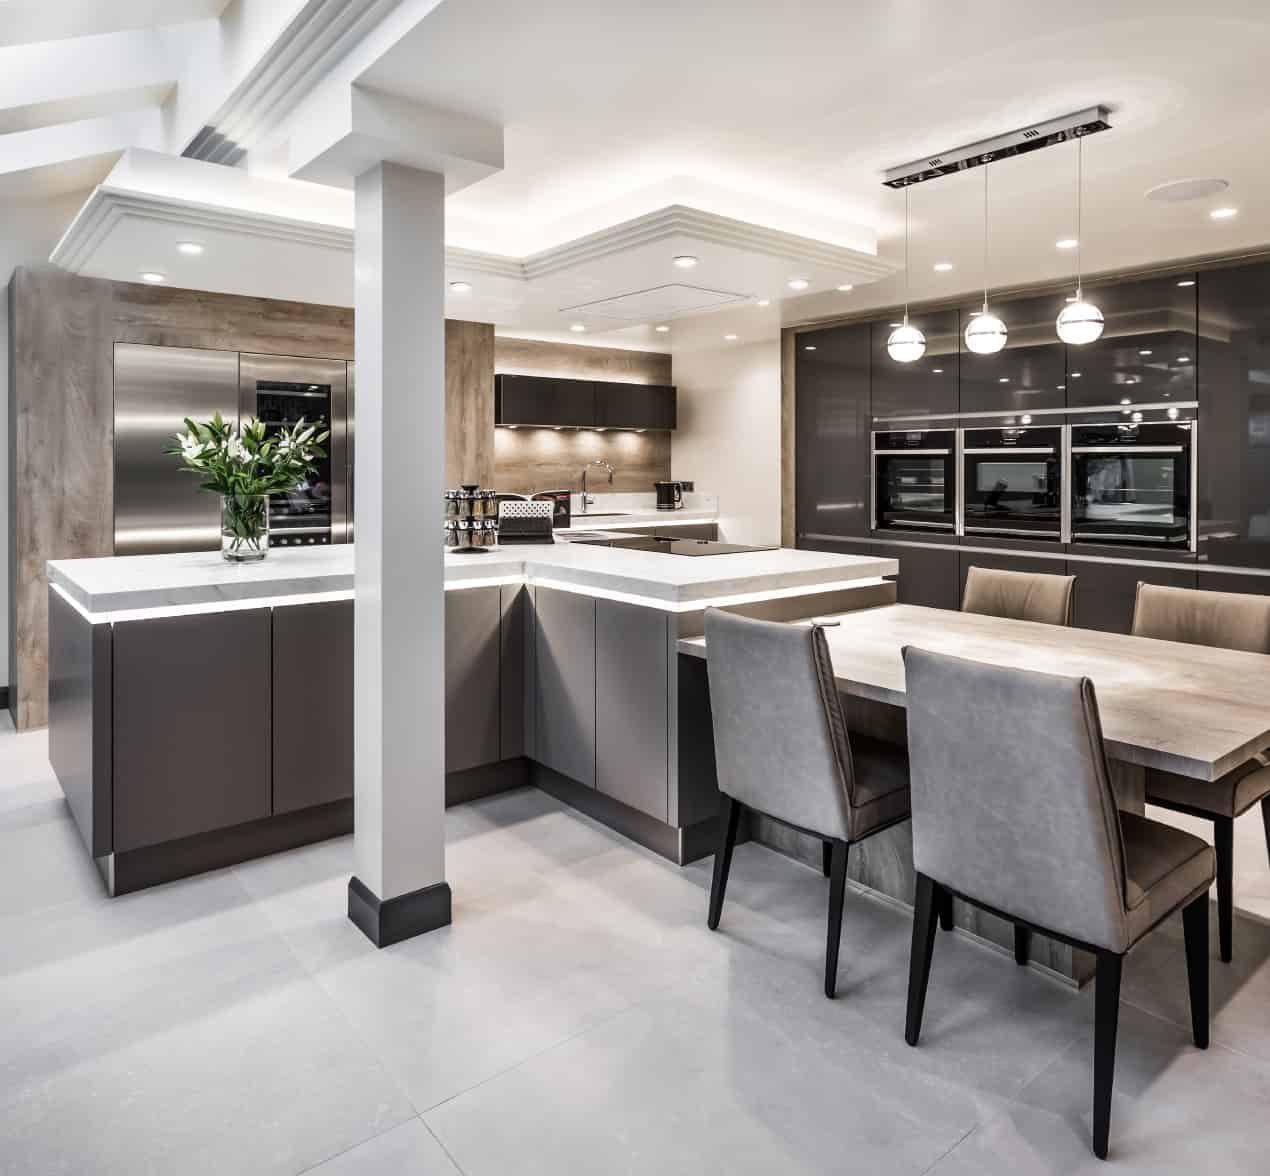 kitchen contemporary modern kitchens stunning style island centre customer practicality combining